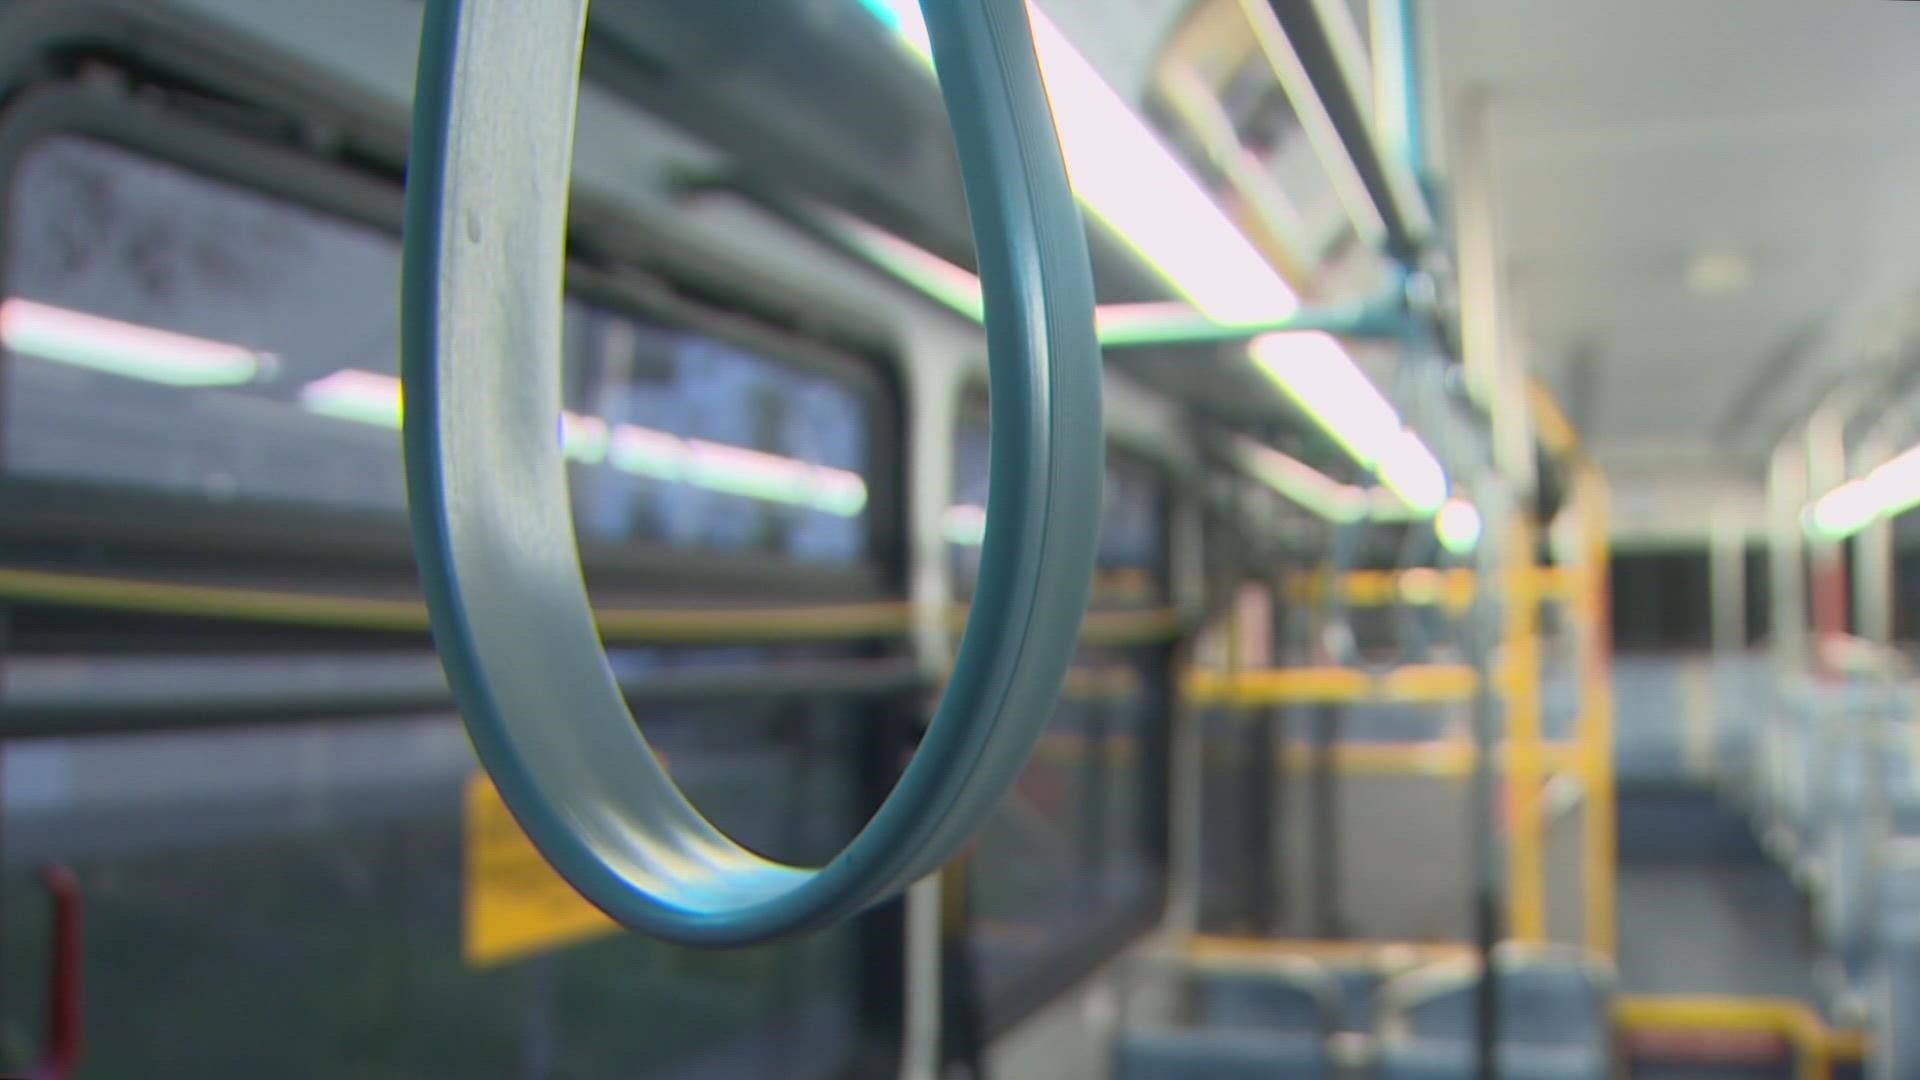 The University of Washington released its report in a first-of-its-kind study on the potential impacts of drug use on transit systems in western Washington.